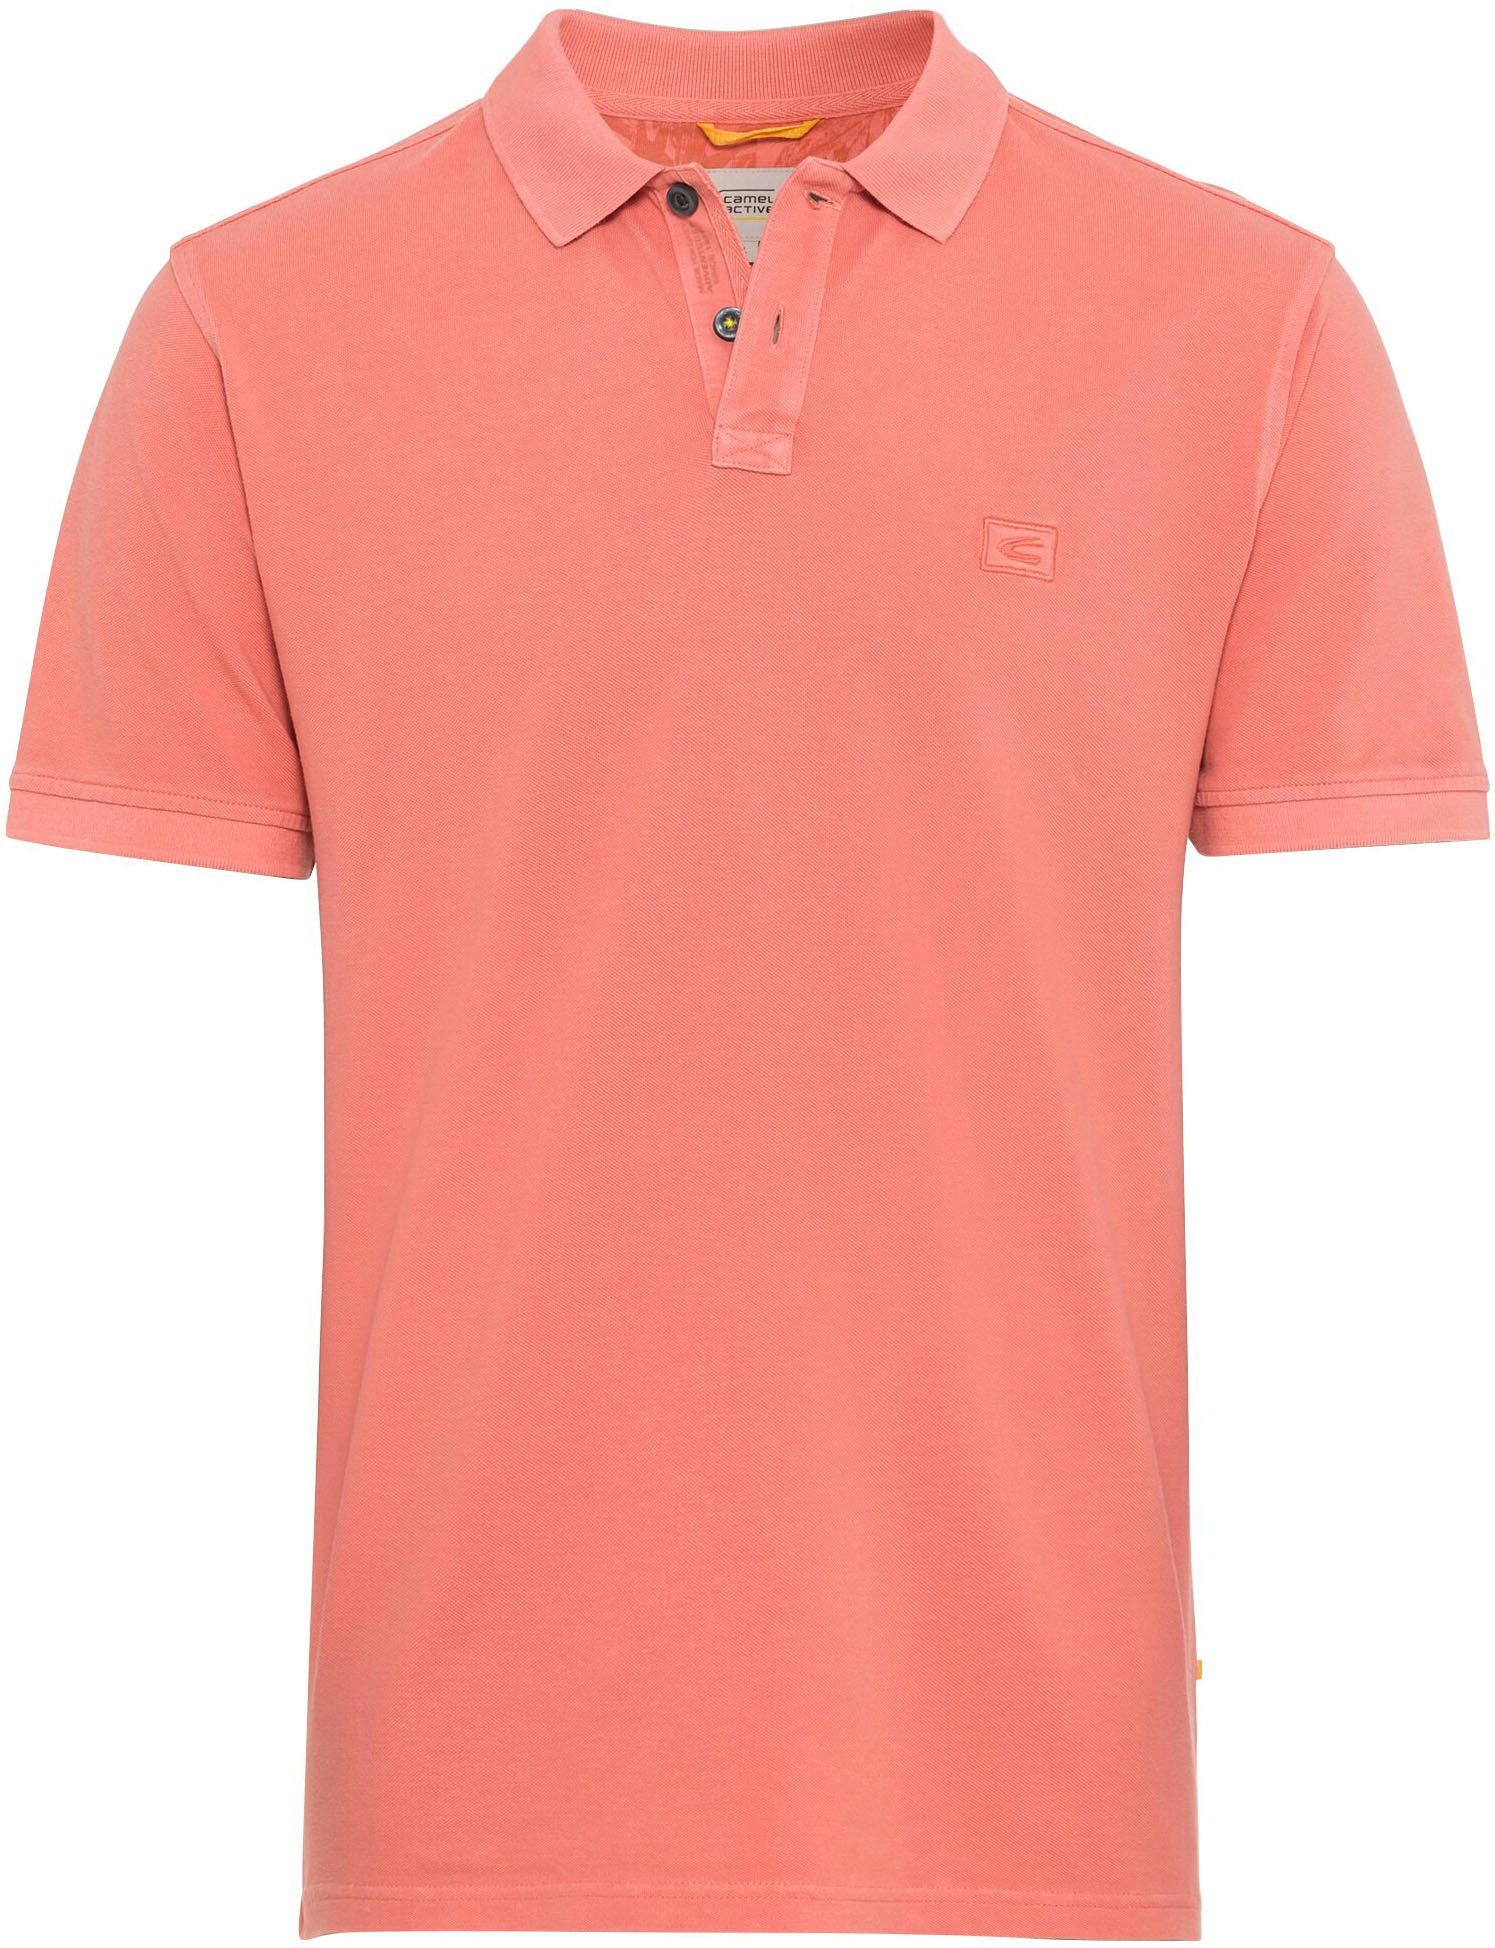 Coral camel Poloshirt red active